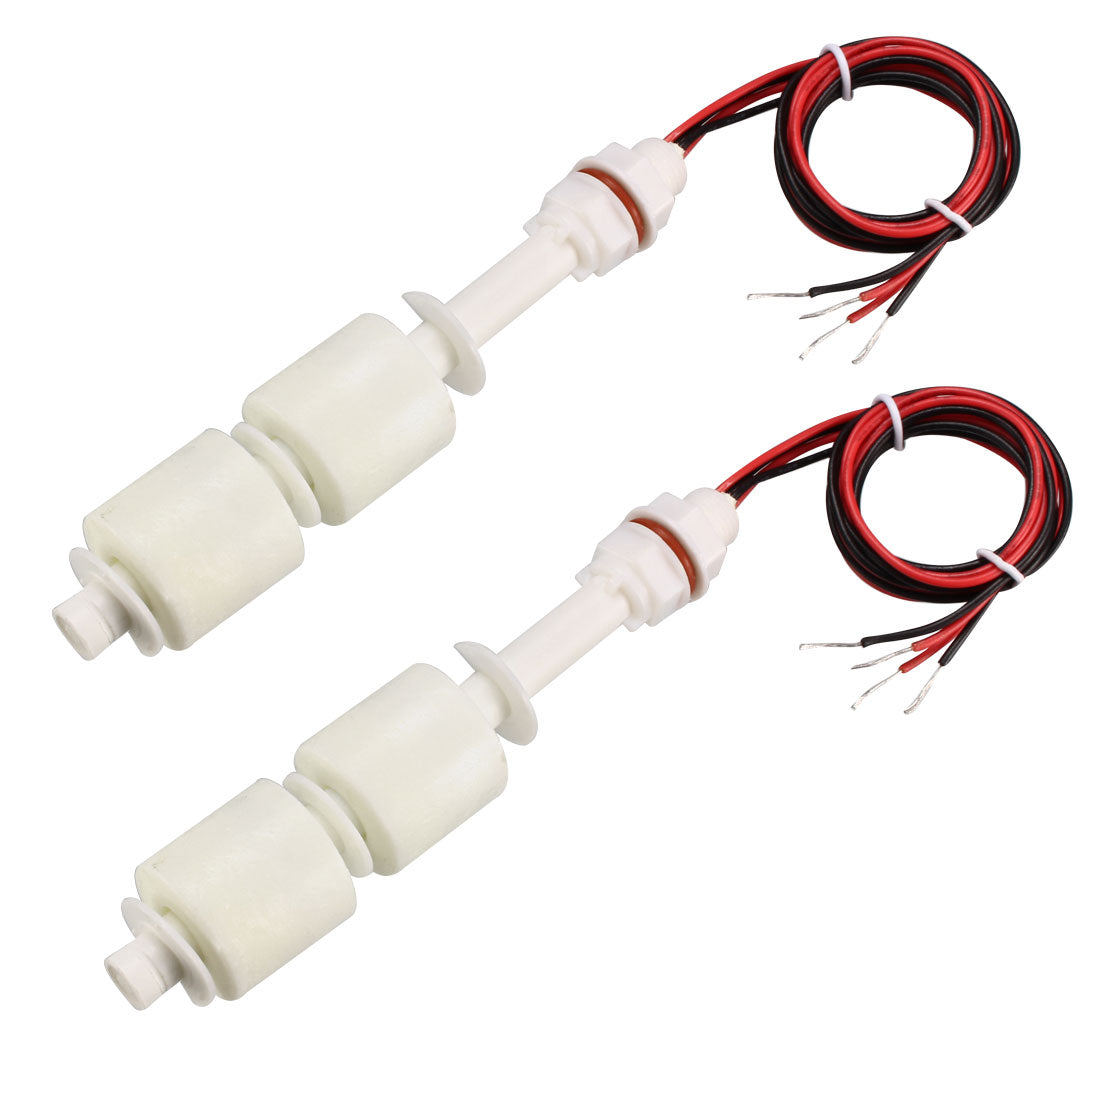 uxcell Uxcell 2pcs PP Dual Ball Float Switch M10 115mm Vertical Liquid Water Level Control Sensor Plastic White for Tank Pool